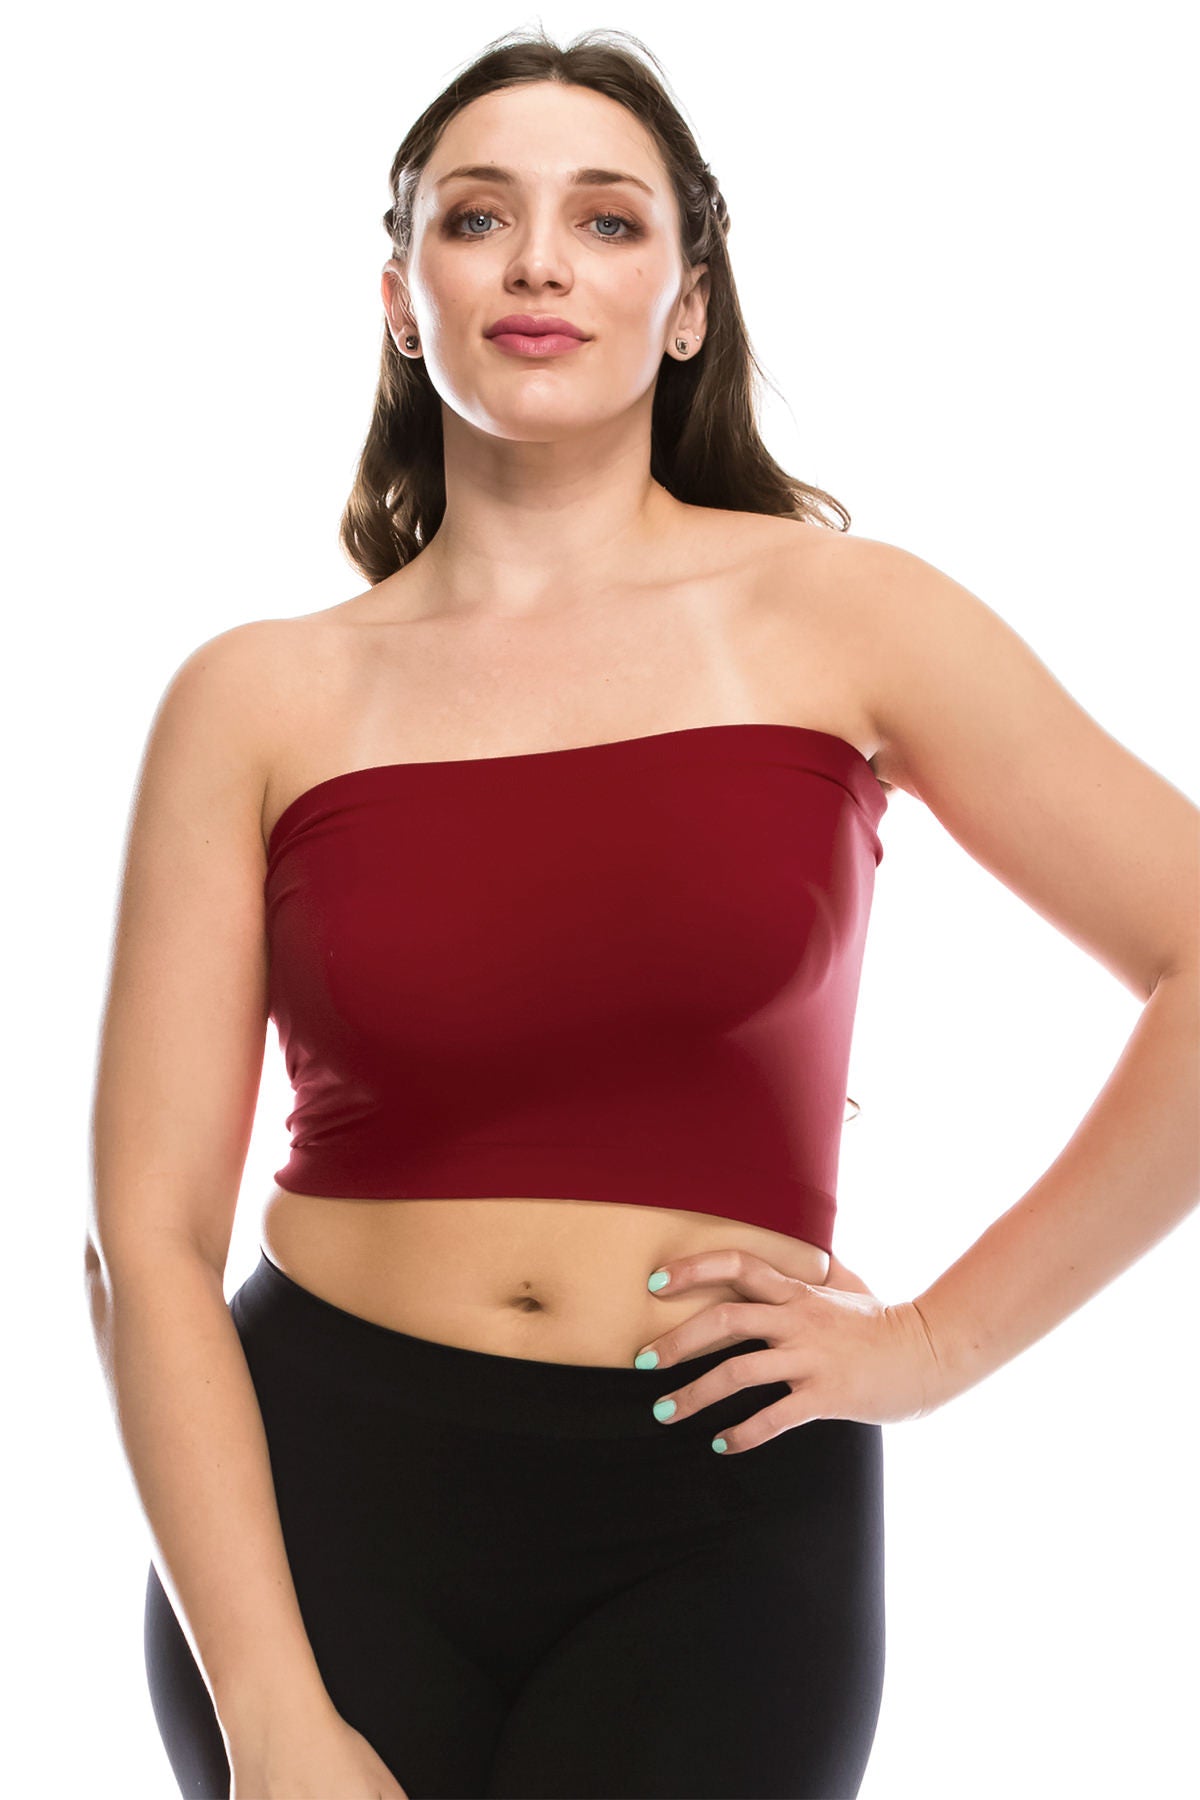 Tube Tops for Women, Tube Top, Womens Tube Tops, Sizes S-XXL and Colors  Black and Nude.(Sold Individually)